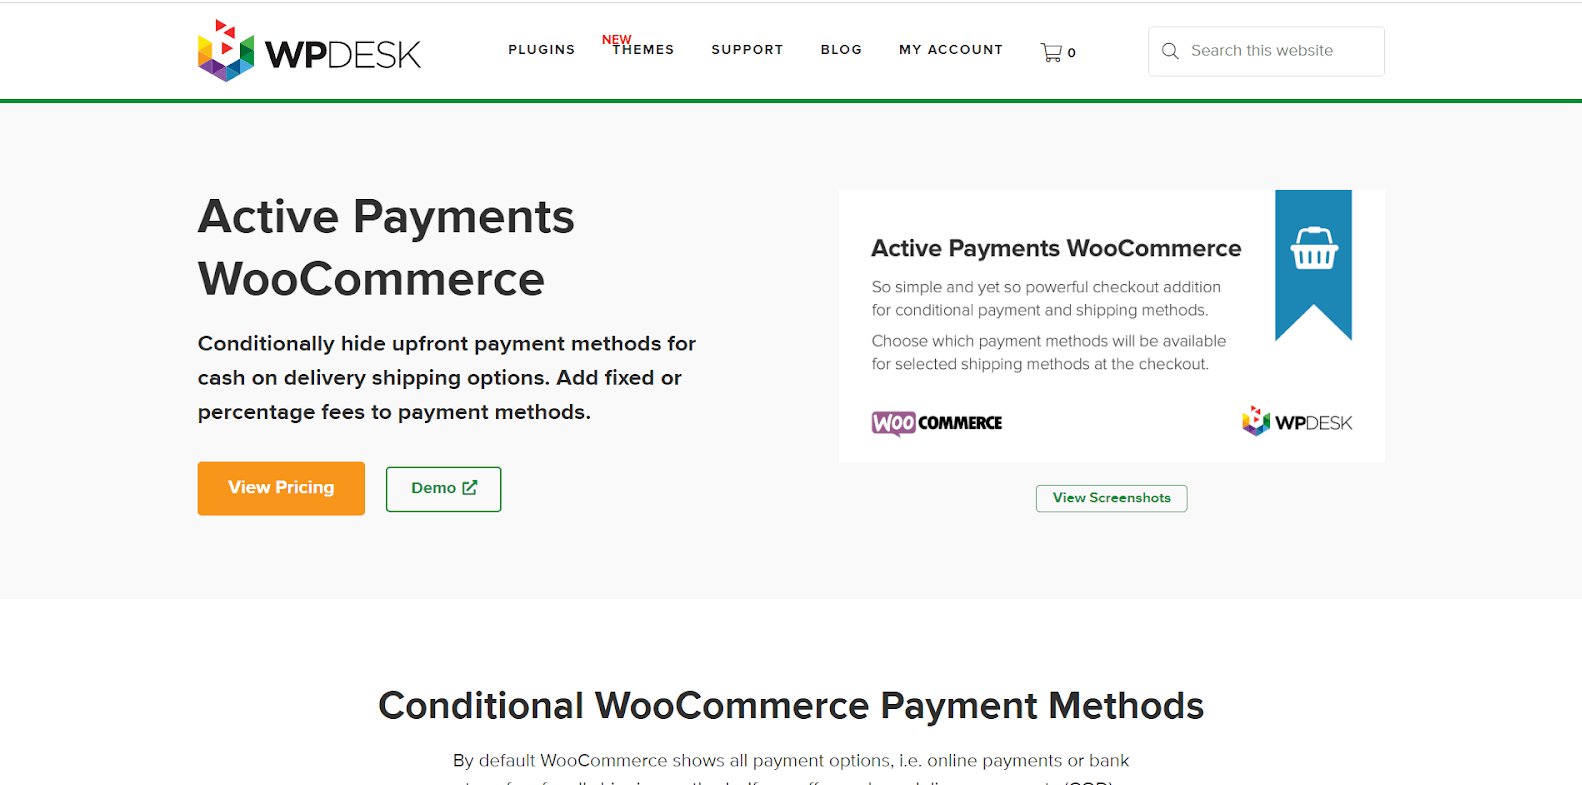 Active Payments WooCommerce by WPDesk